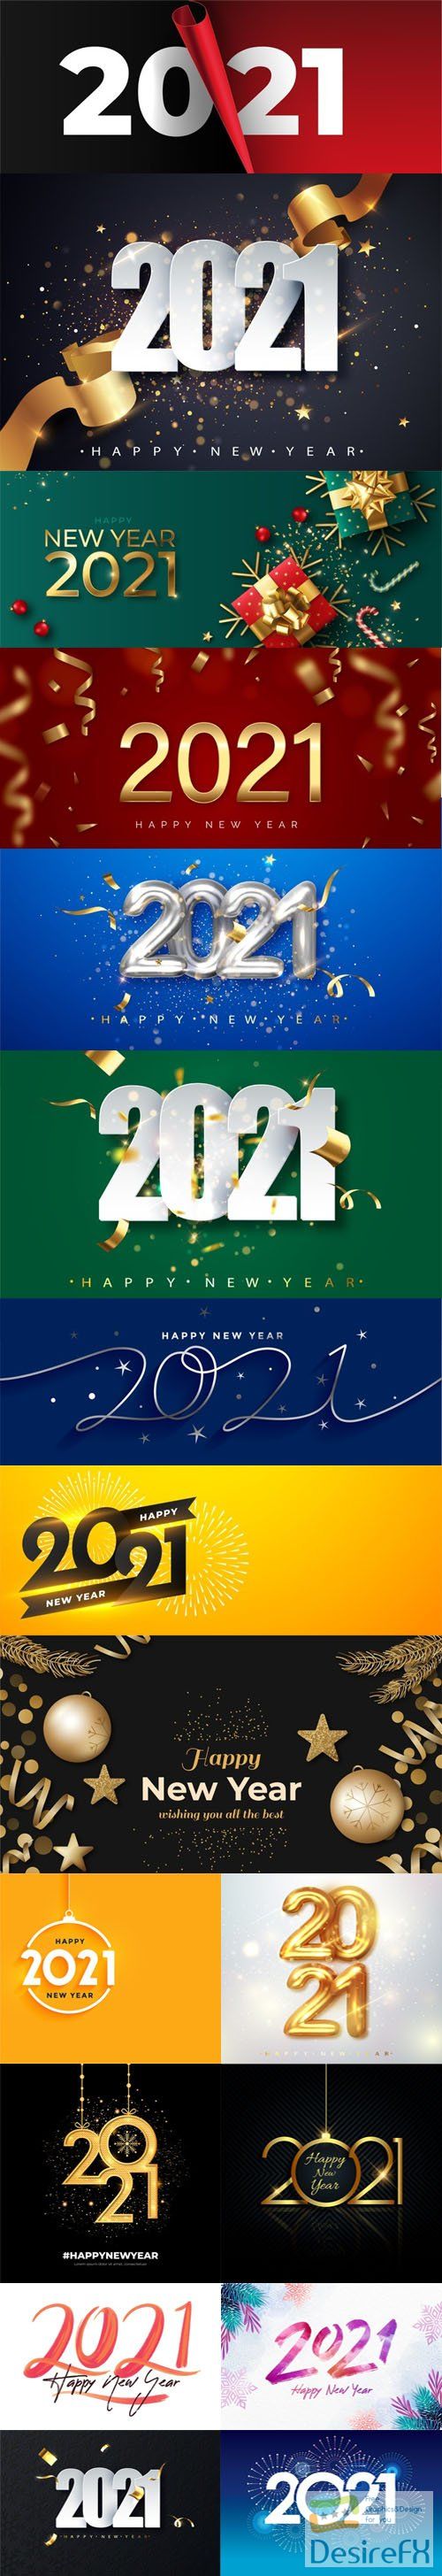 17 Happy New Year 2021 Backgrounds Collection in Vector